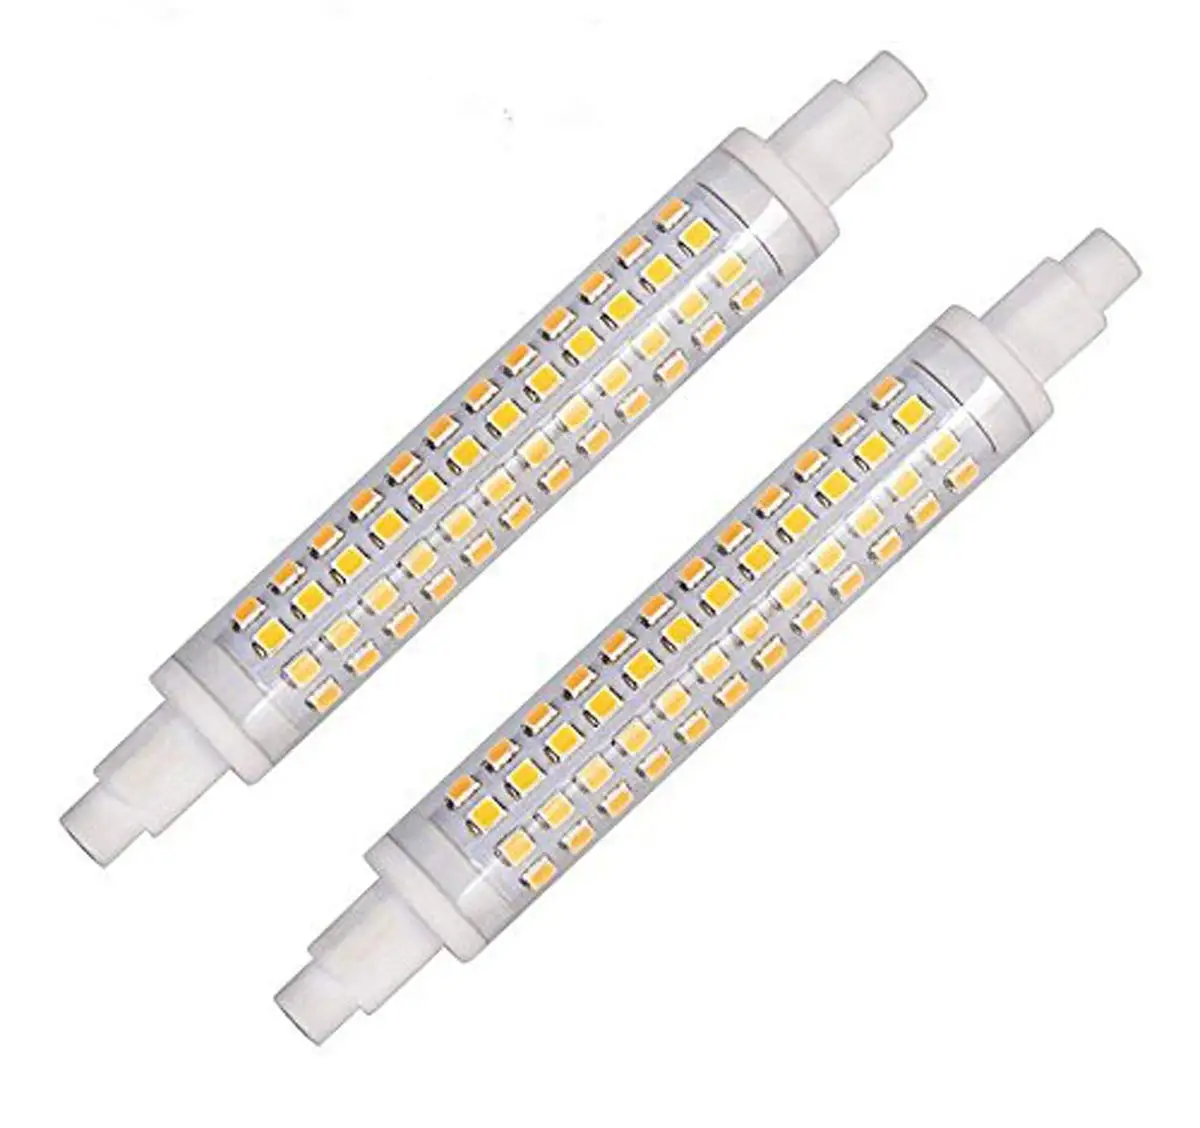 CTKcom R7S 78mm LED Bulbs 2 Pack J Type 78mm Double Ended 5W 120Volts Halogen Bulbs Daylight White 6000K,R7S Double Ended Filament Flood Lights Quartz Tube Lamps 50W Replacement Halogen Bulb,2 Pack